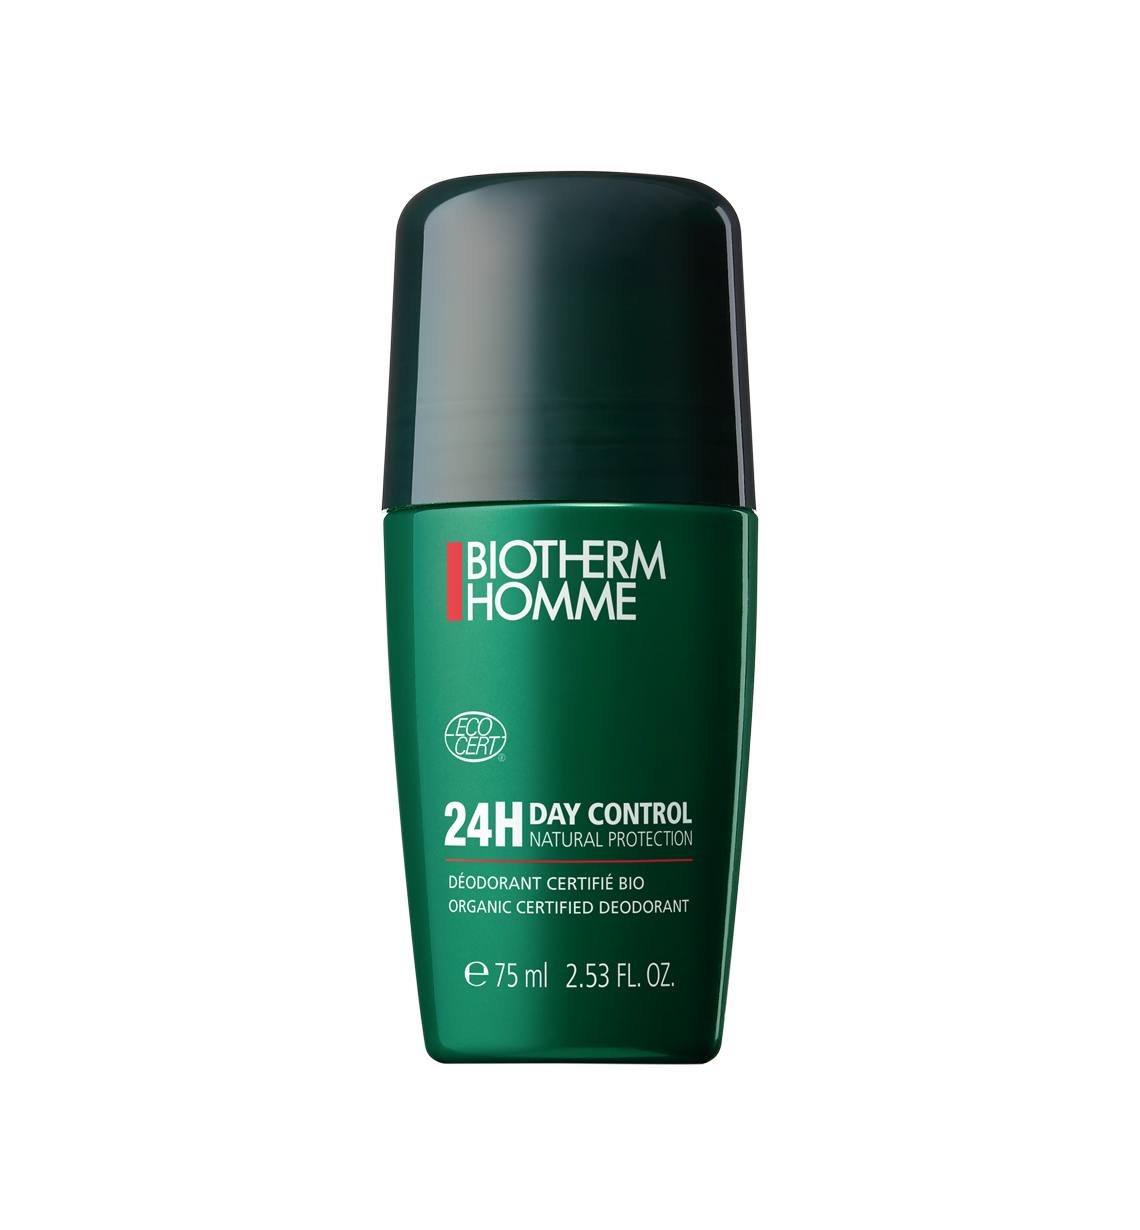 Homme Day Control Natural Protection 24H